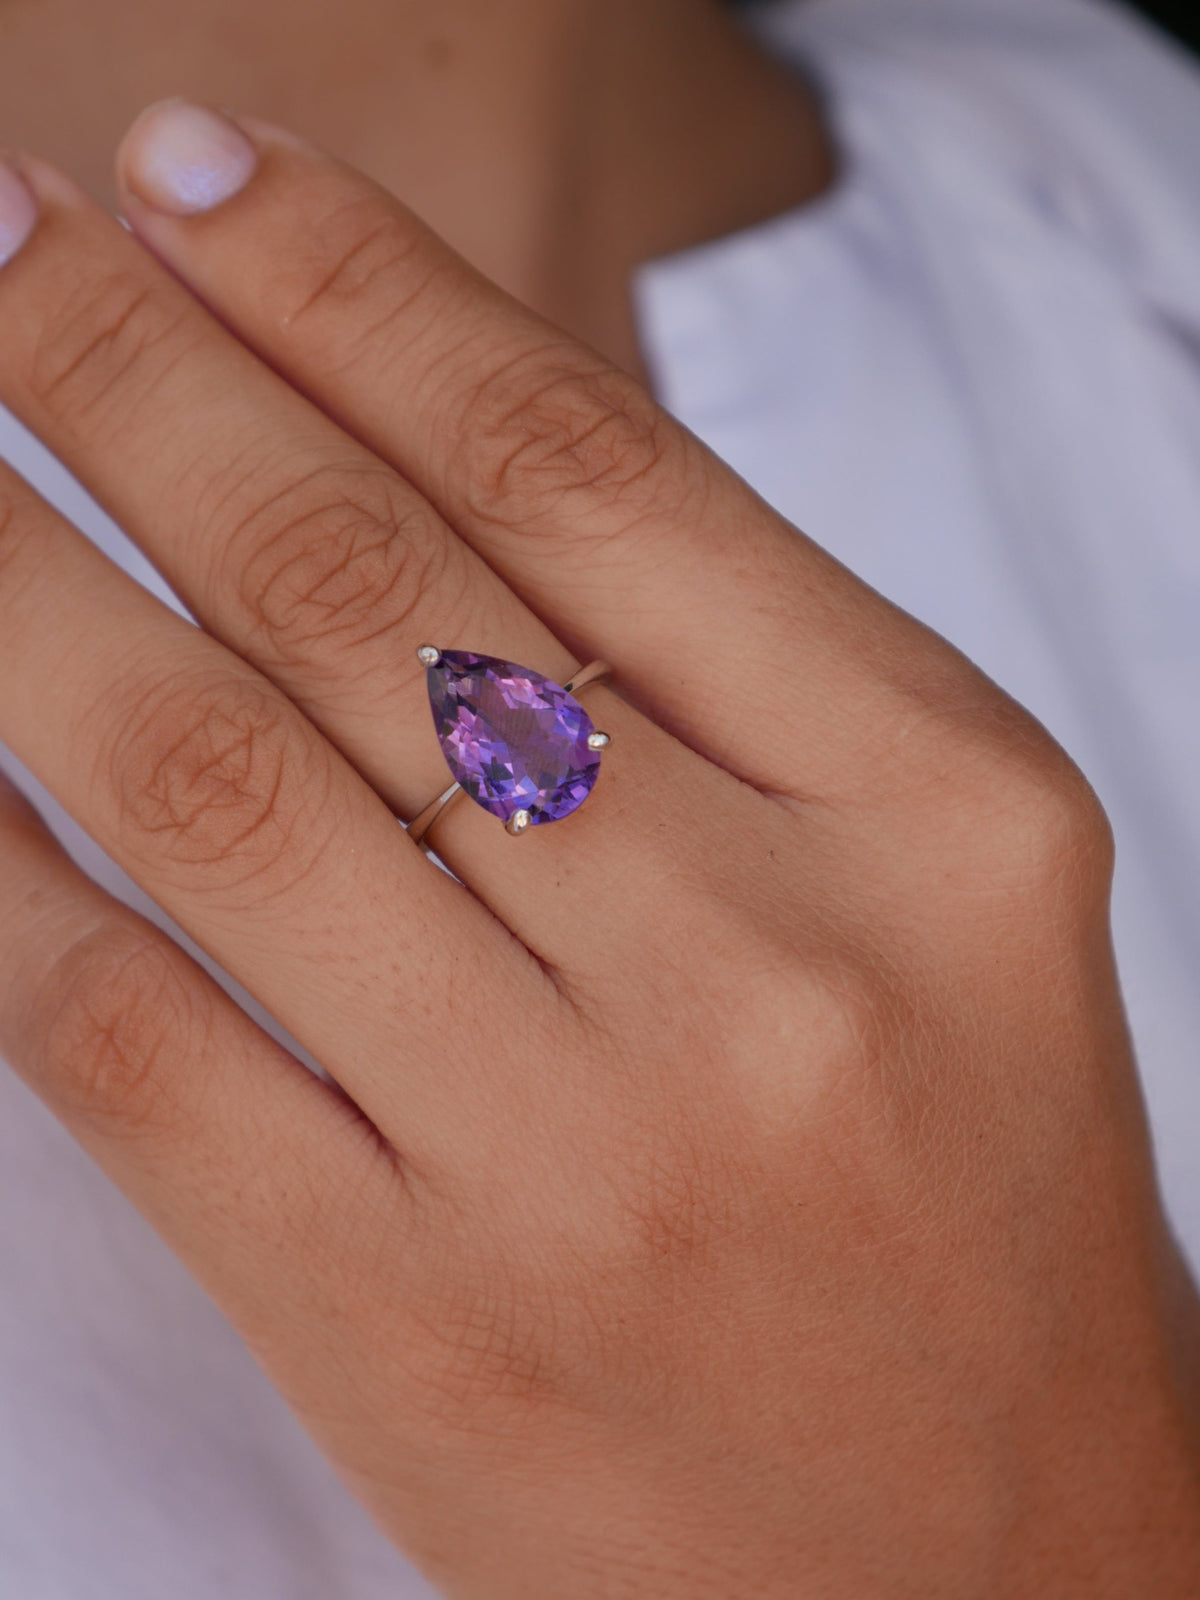 rings, silver ring, 925, amethyst ring, purple rings, pear shape birthstone rings, engagement rings, birthstone engagement rings, pear shaped rings, cool rings, cocktail rings, jewelry, trending on tiktok, accessories, fashion jewelry, white gold rings, purple rings, february birthstone rings, long rings, rings for the index finger, nice rings, dainty rings, statement rings, fine jewelry, pear shape rings, tear shape purple ring, gift ideas, anniversary, birthday, wedding jewelry , amethyst jewelry, ring